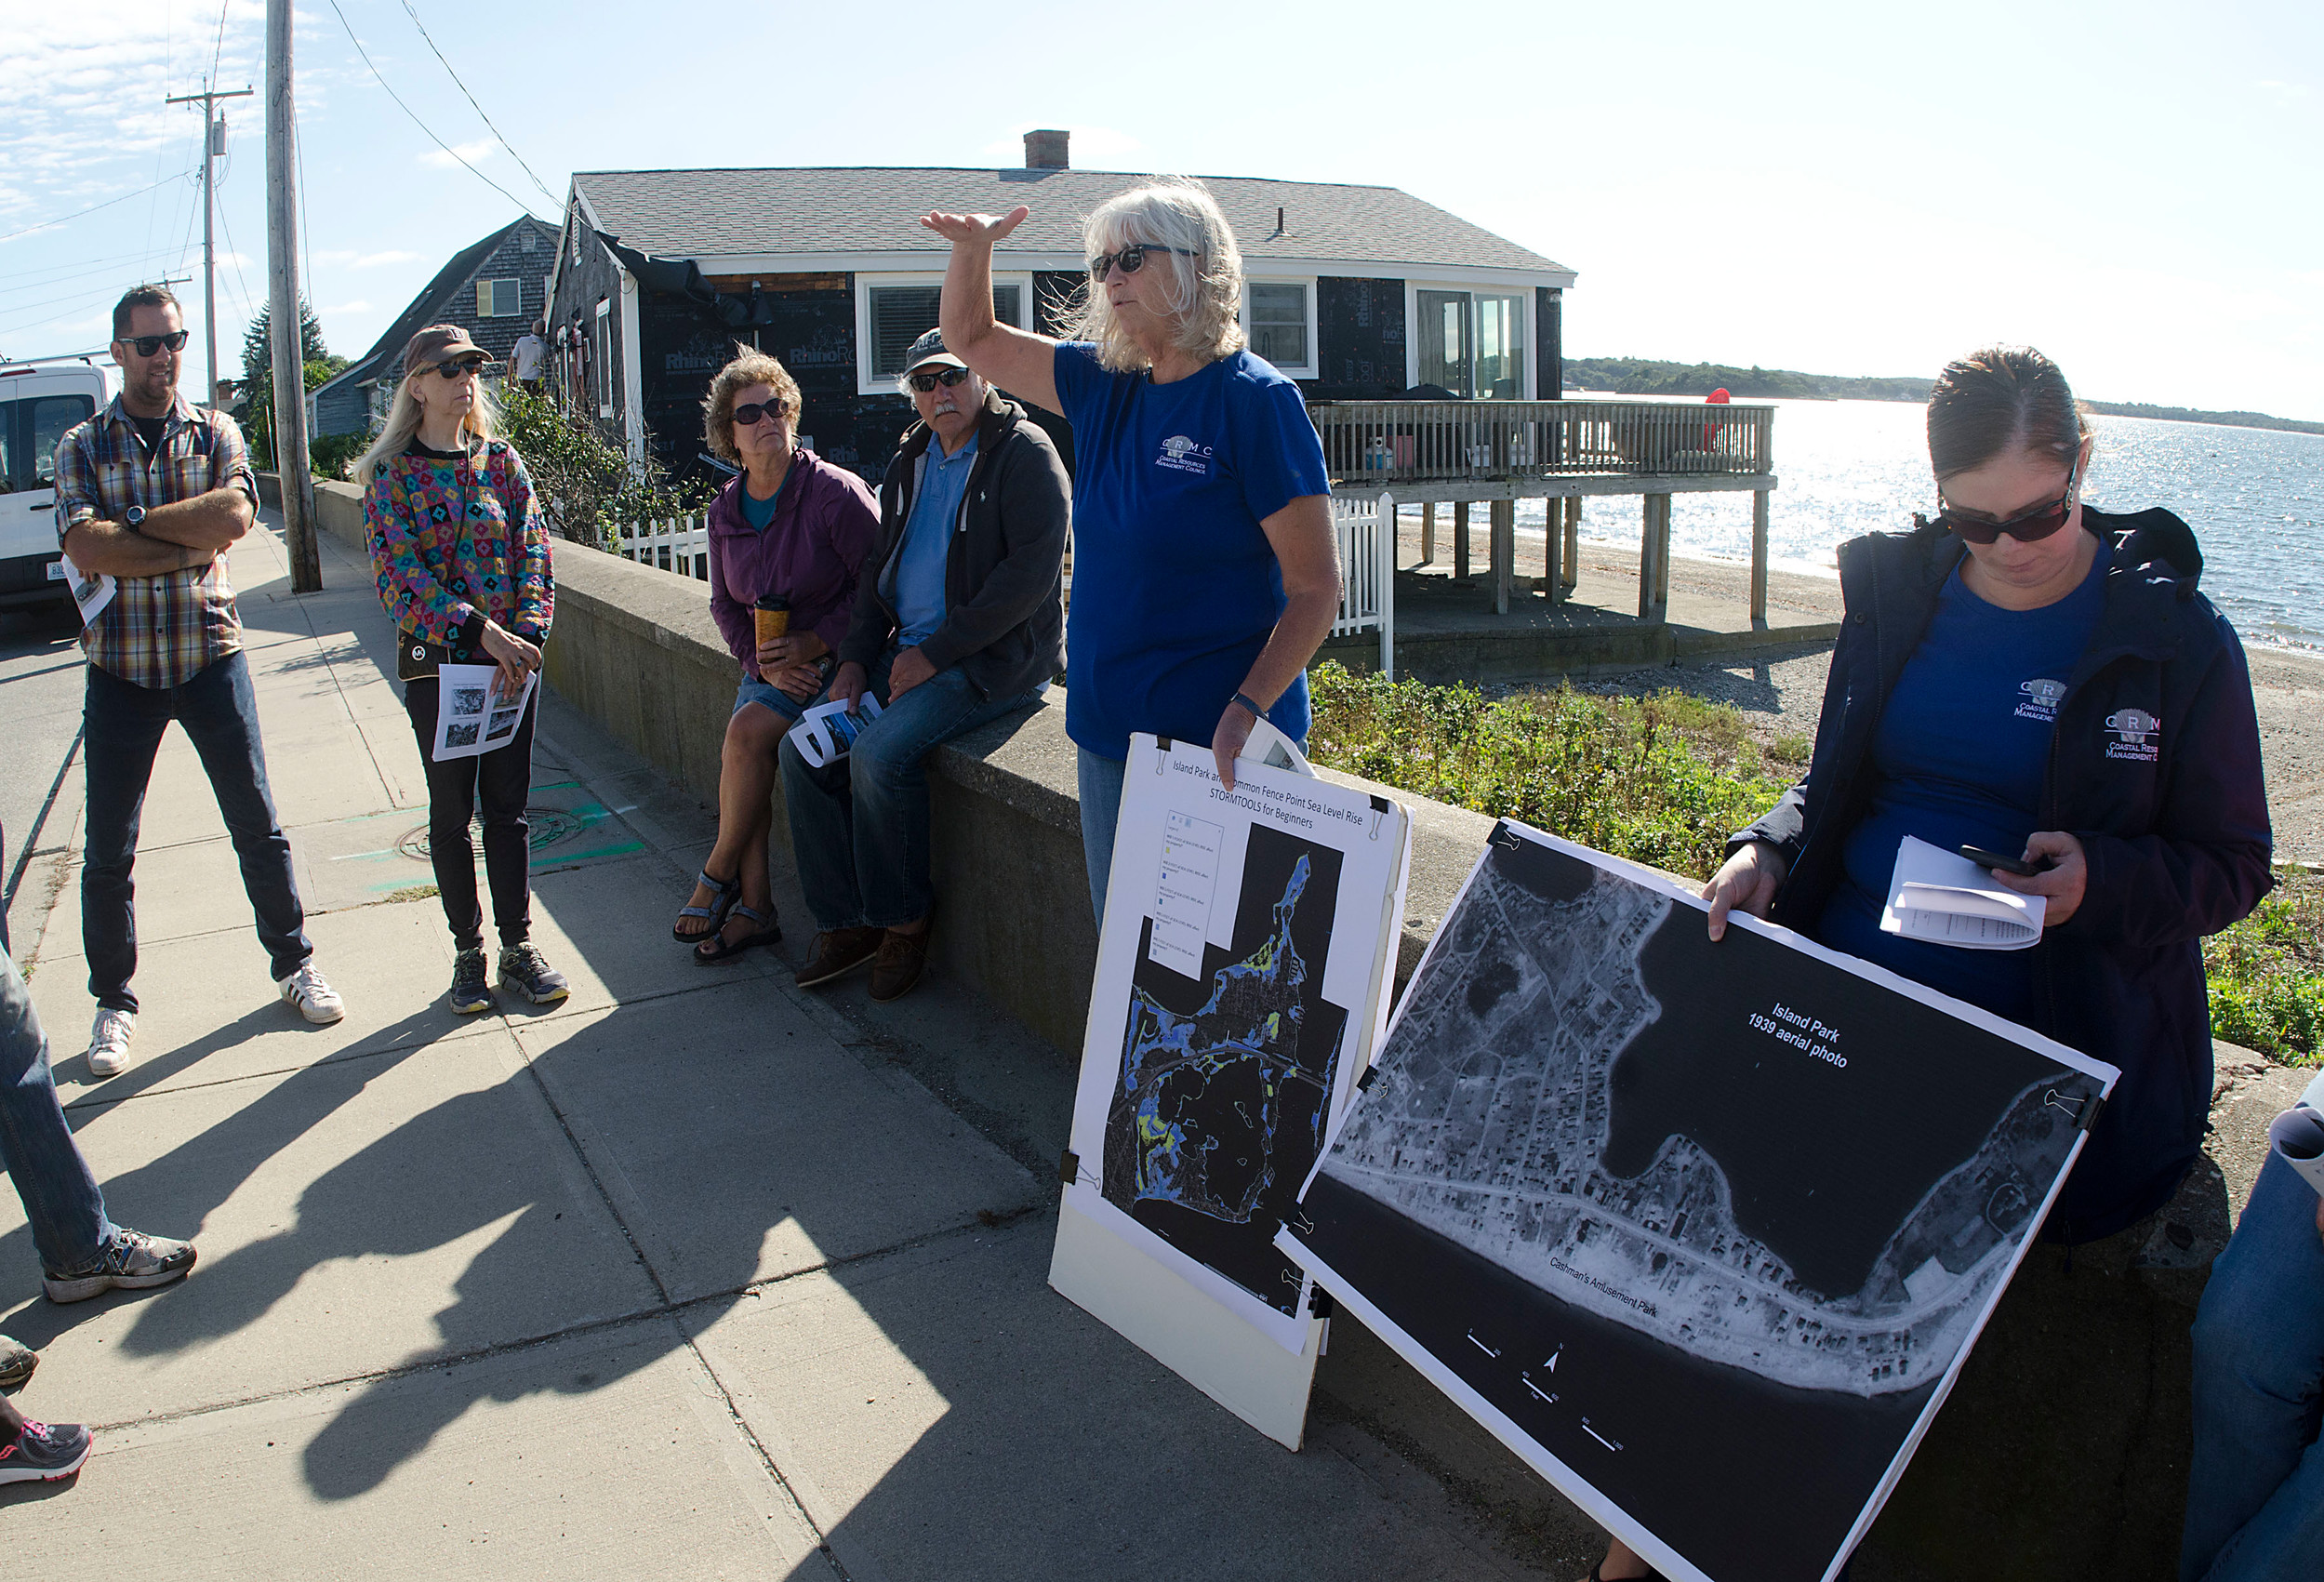 Janet Freedman (middle) and Laura Dywer (right) of CRMC speak during the 1938 Hurricane anniversary walking tour.